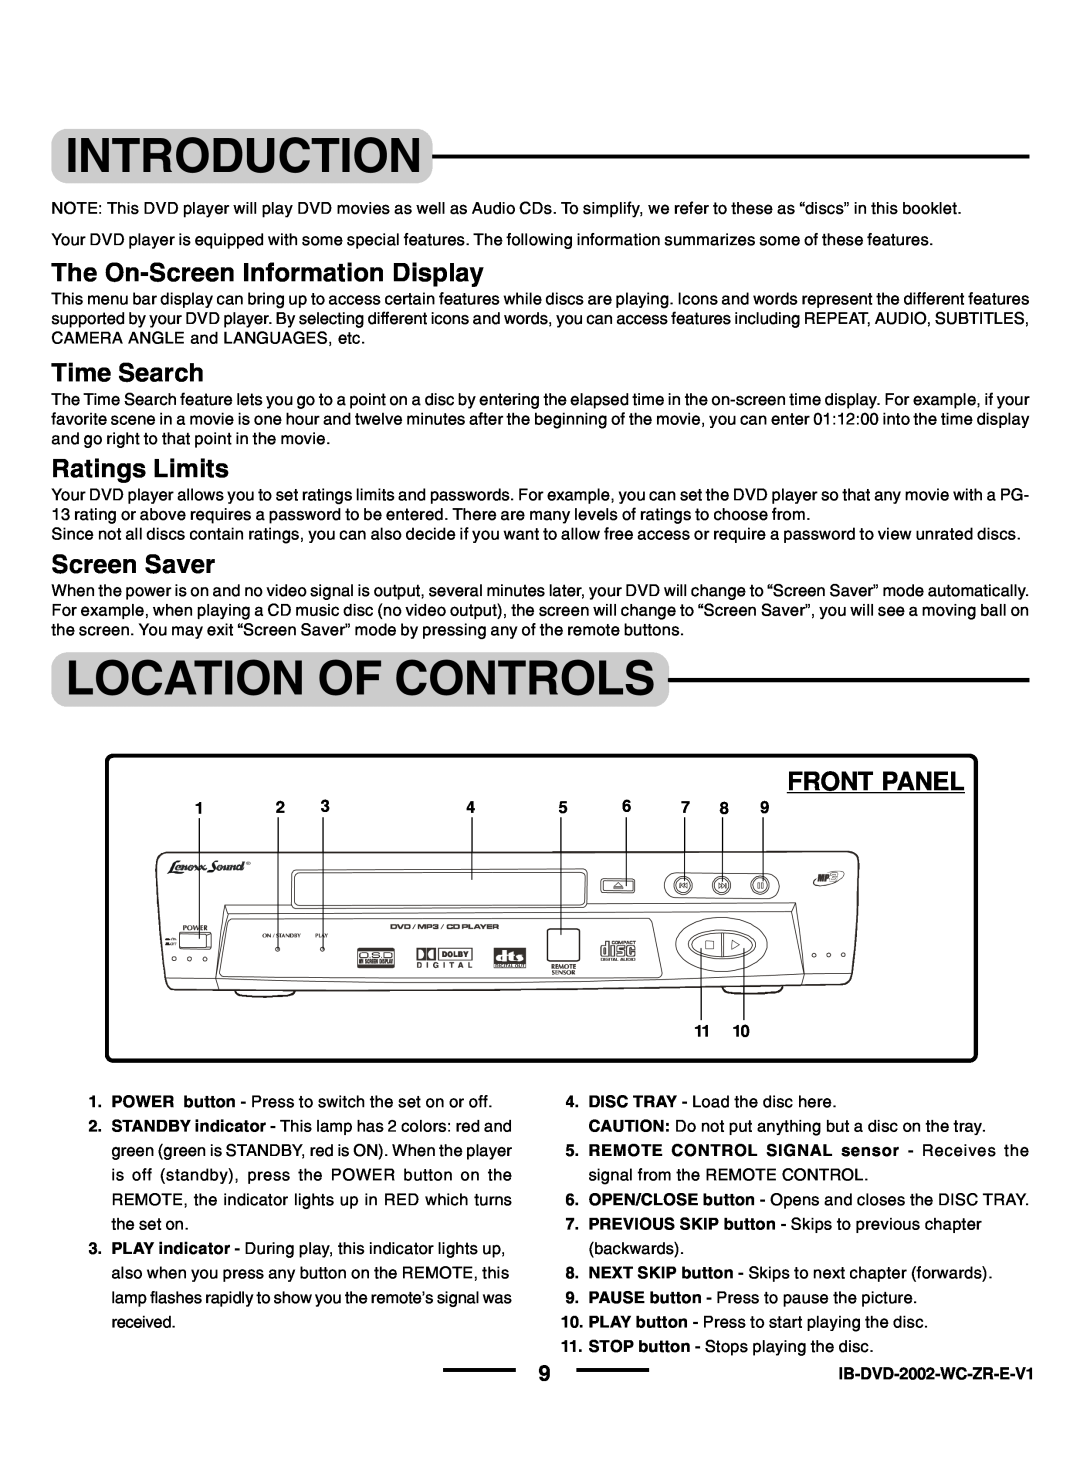 Lenoxx Electronics DVD-2002 Introduction, Location Of Controls, The On-Screen Information Display, Time Search 